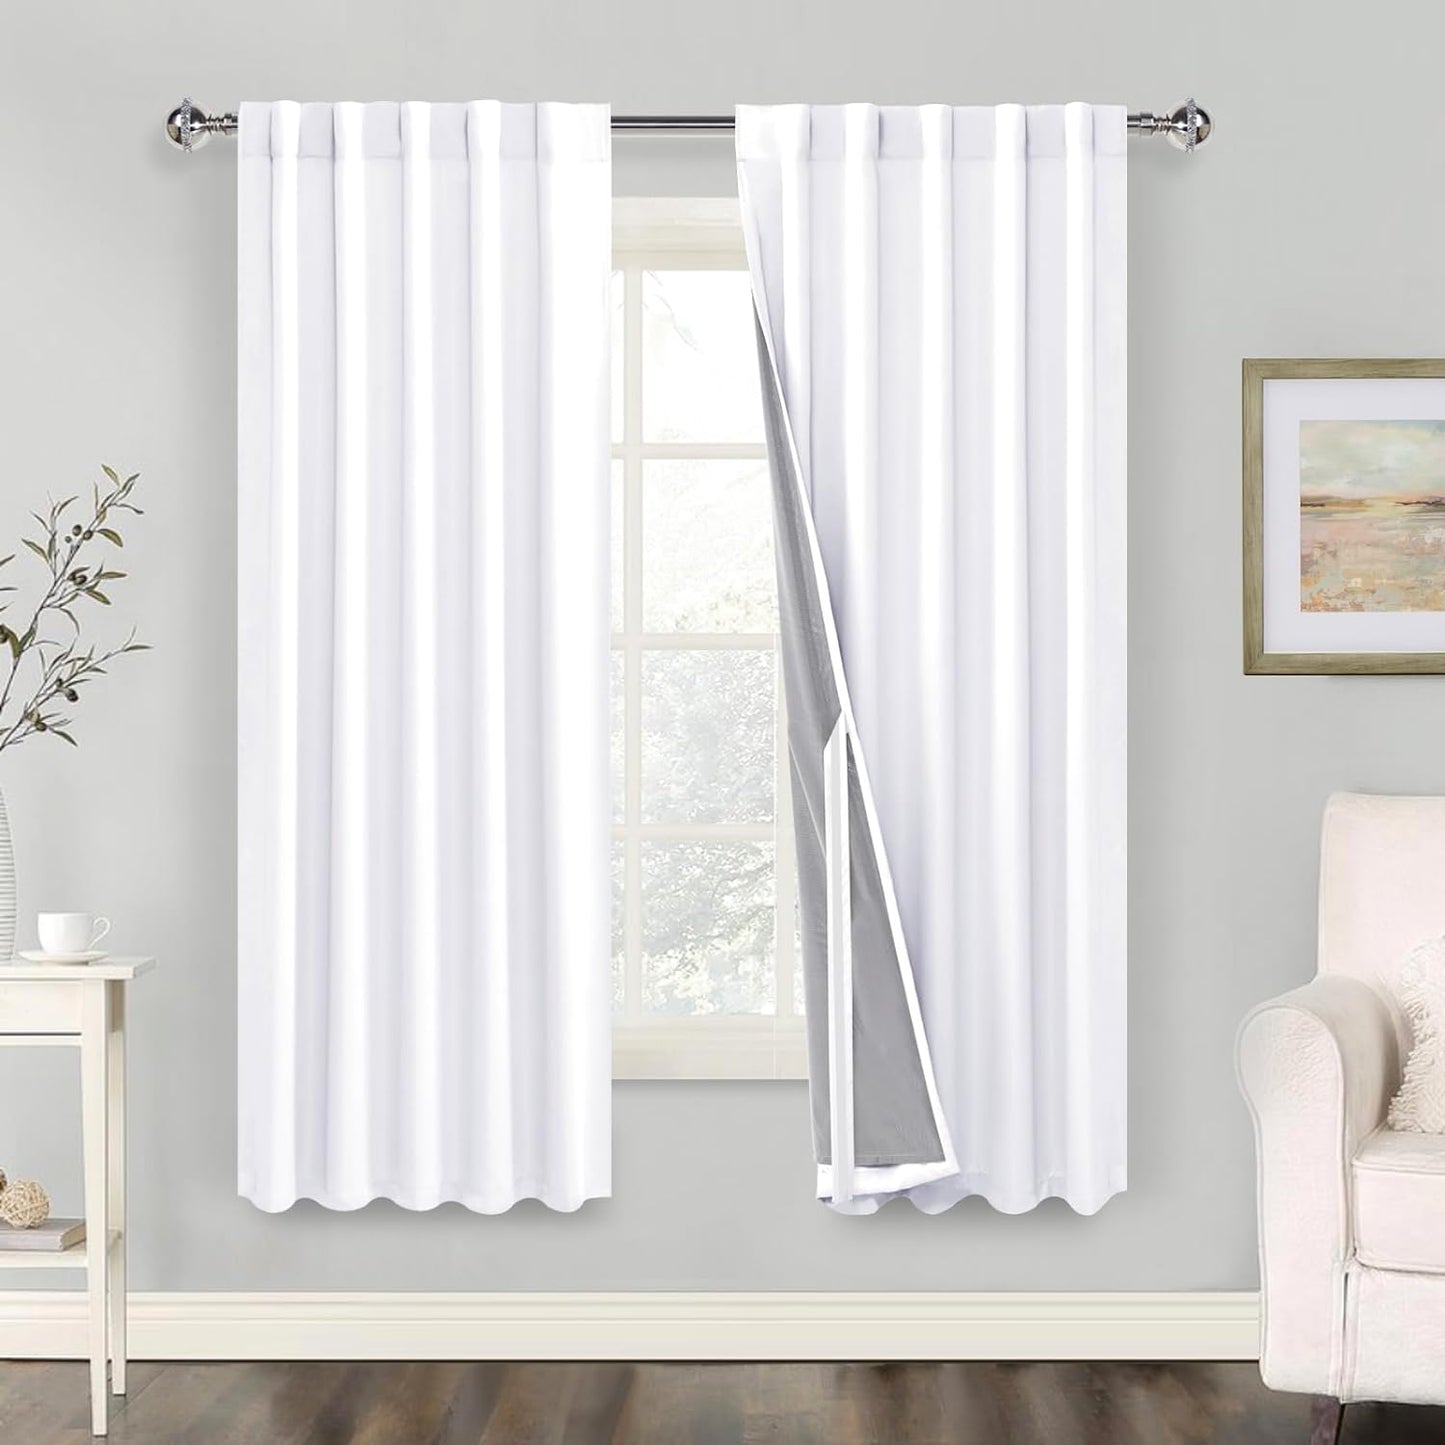 100% Blackout Curtains 2 Panels with Tiebacks- Heat and Full Light Blocking Window Treatment with Black Liner for Bedroom/Nursery, Rod Pocket & Back Tab，White, W52 X L84 Inches Long, Set of 2  XWZO White W42" X L63"|2 Panels 